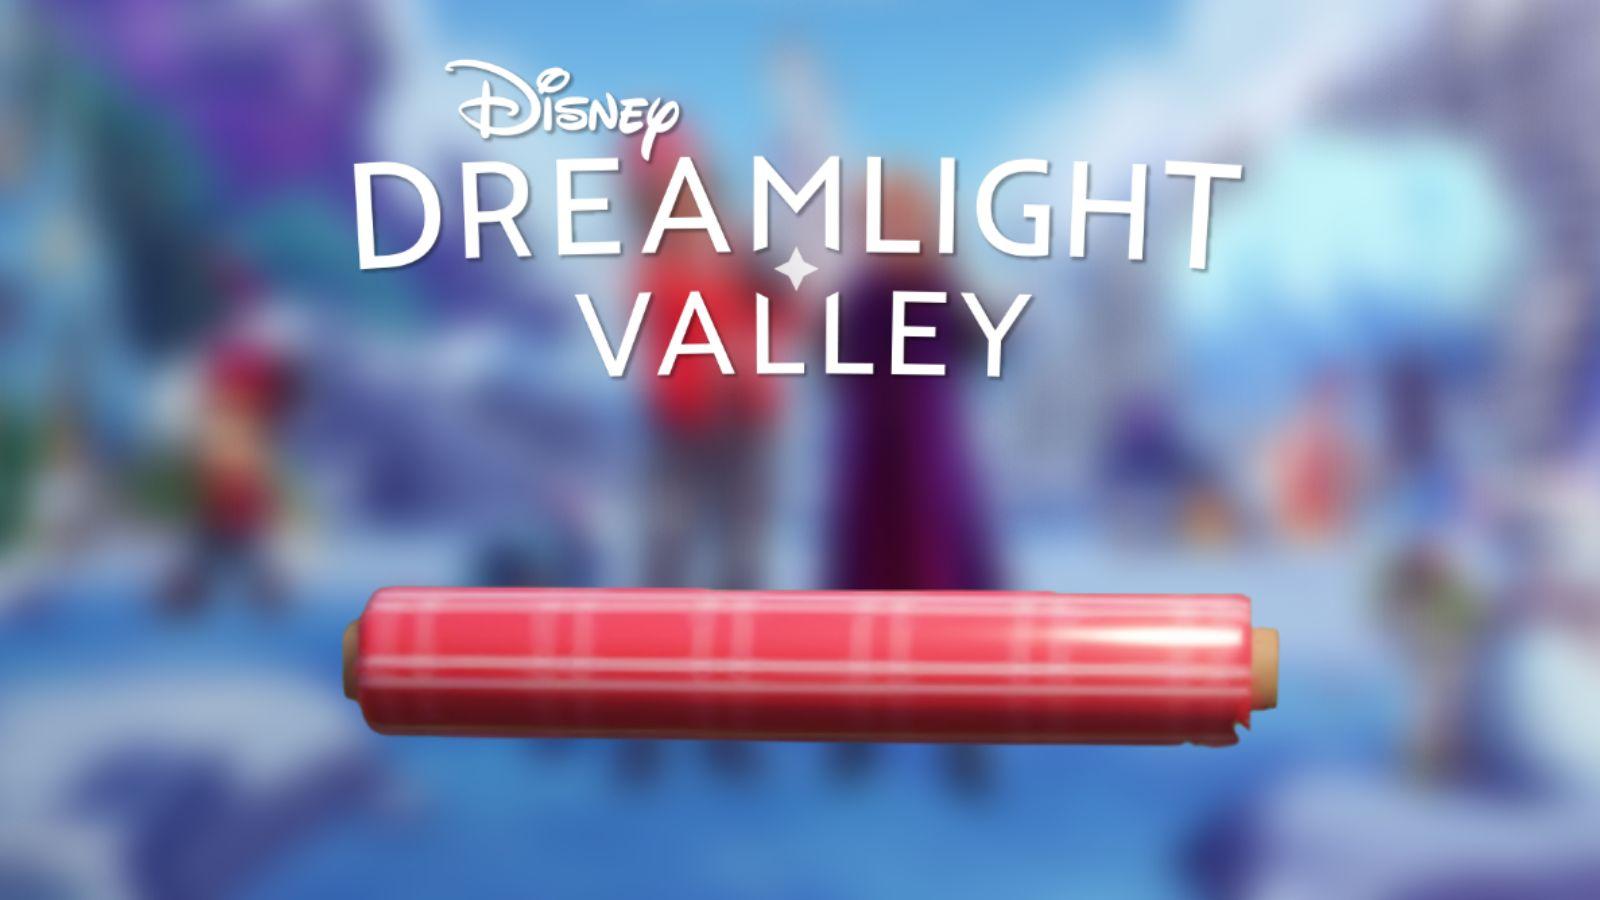 Disney Dreamlight Valley wrapping paper